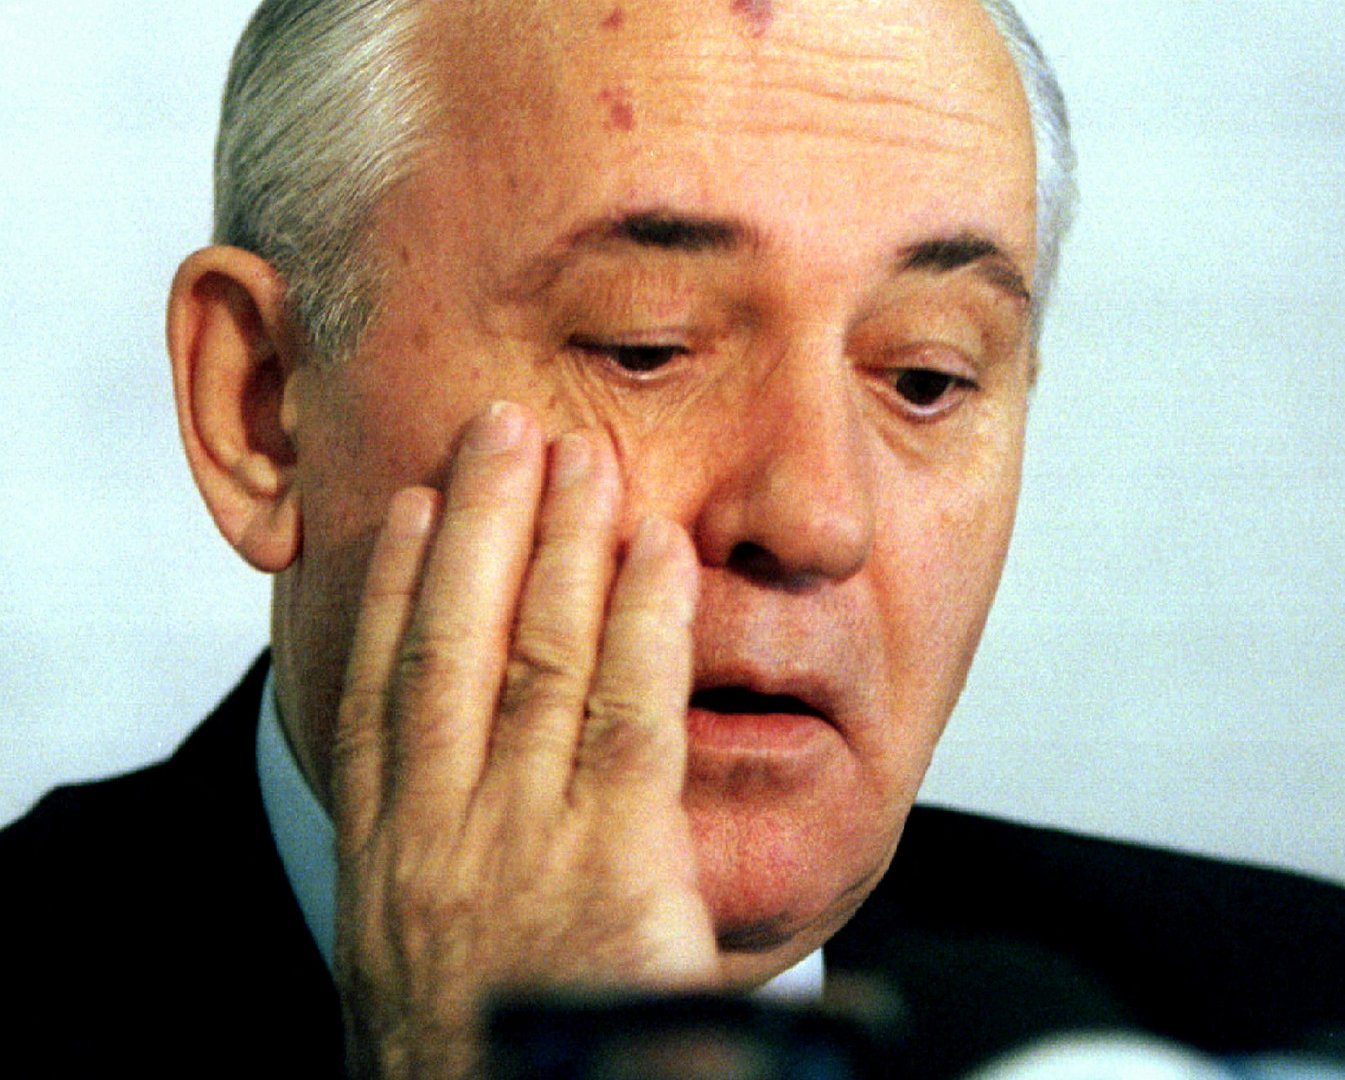 image Gorbachev given cascade of assurances by West